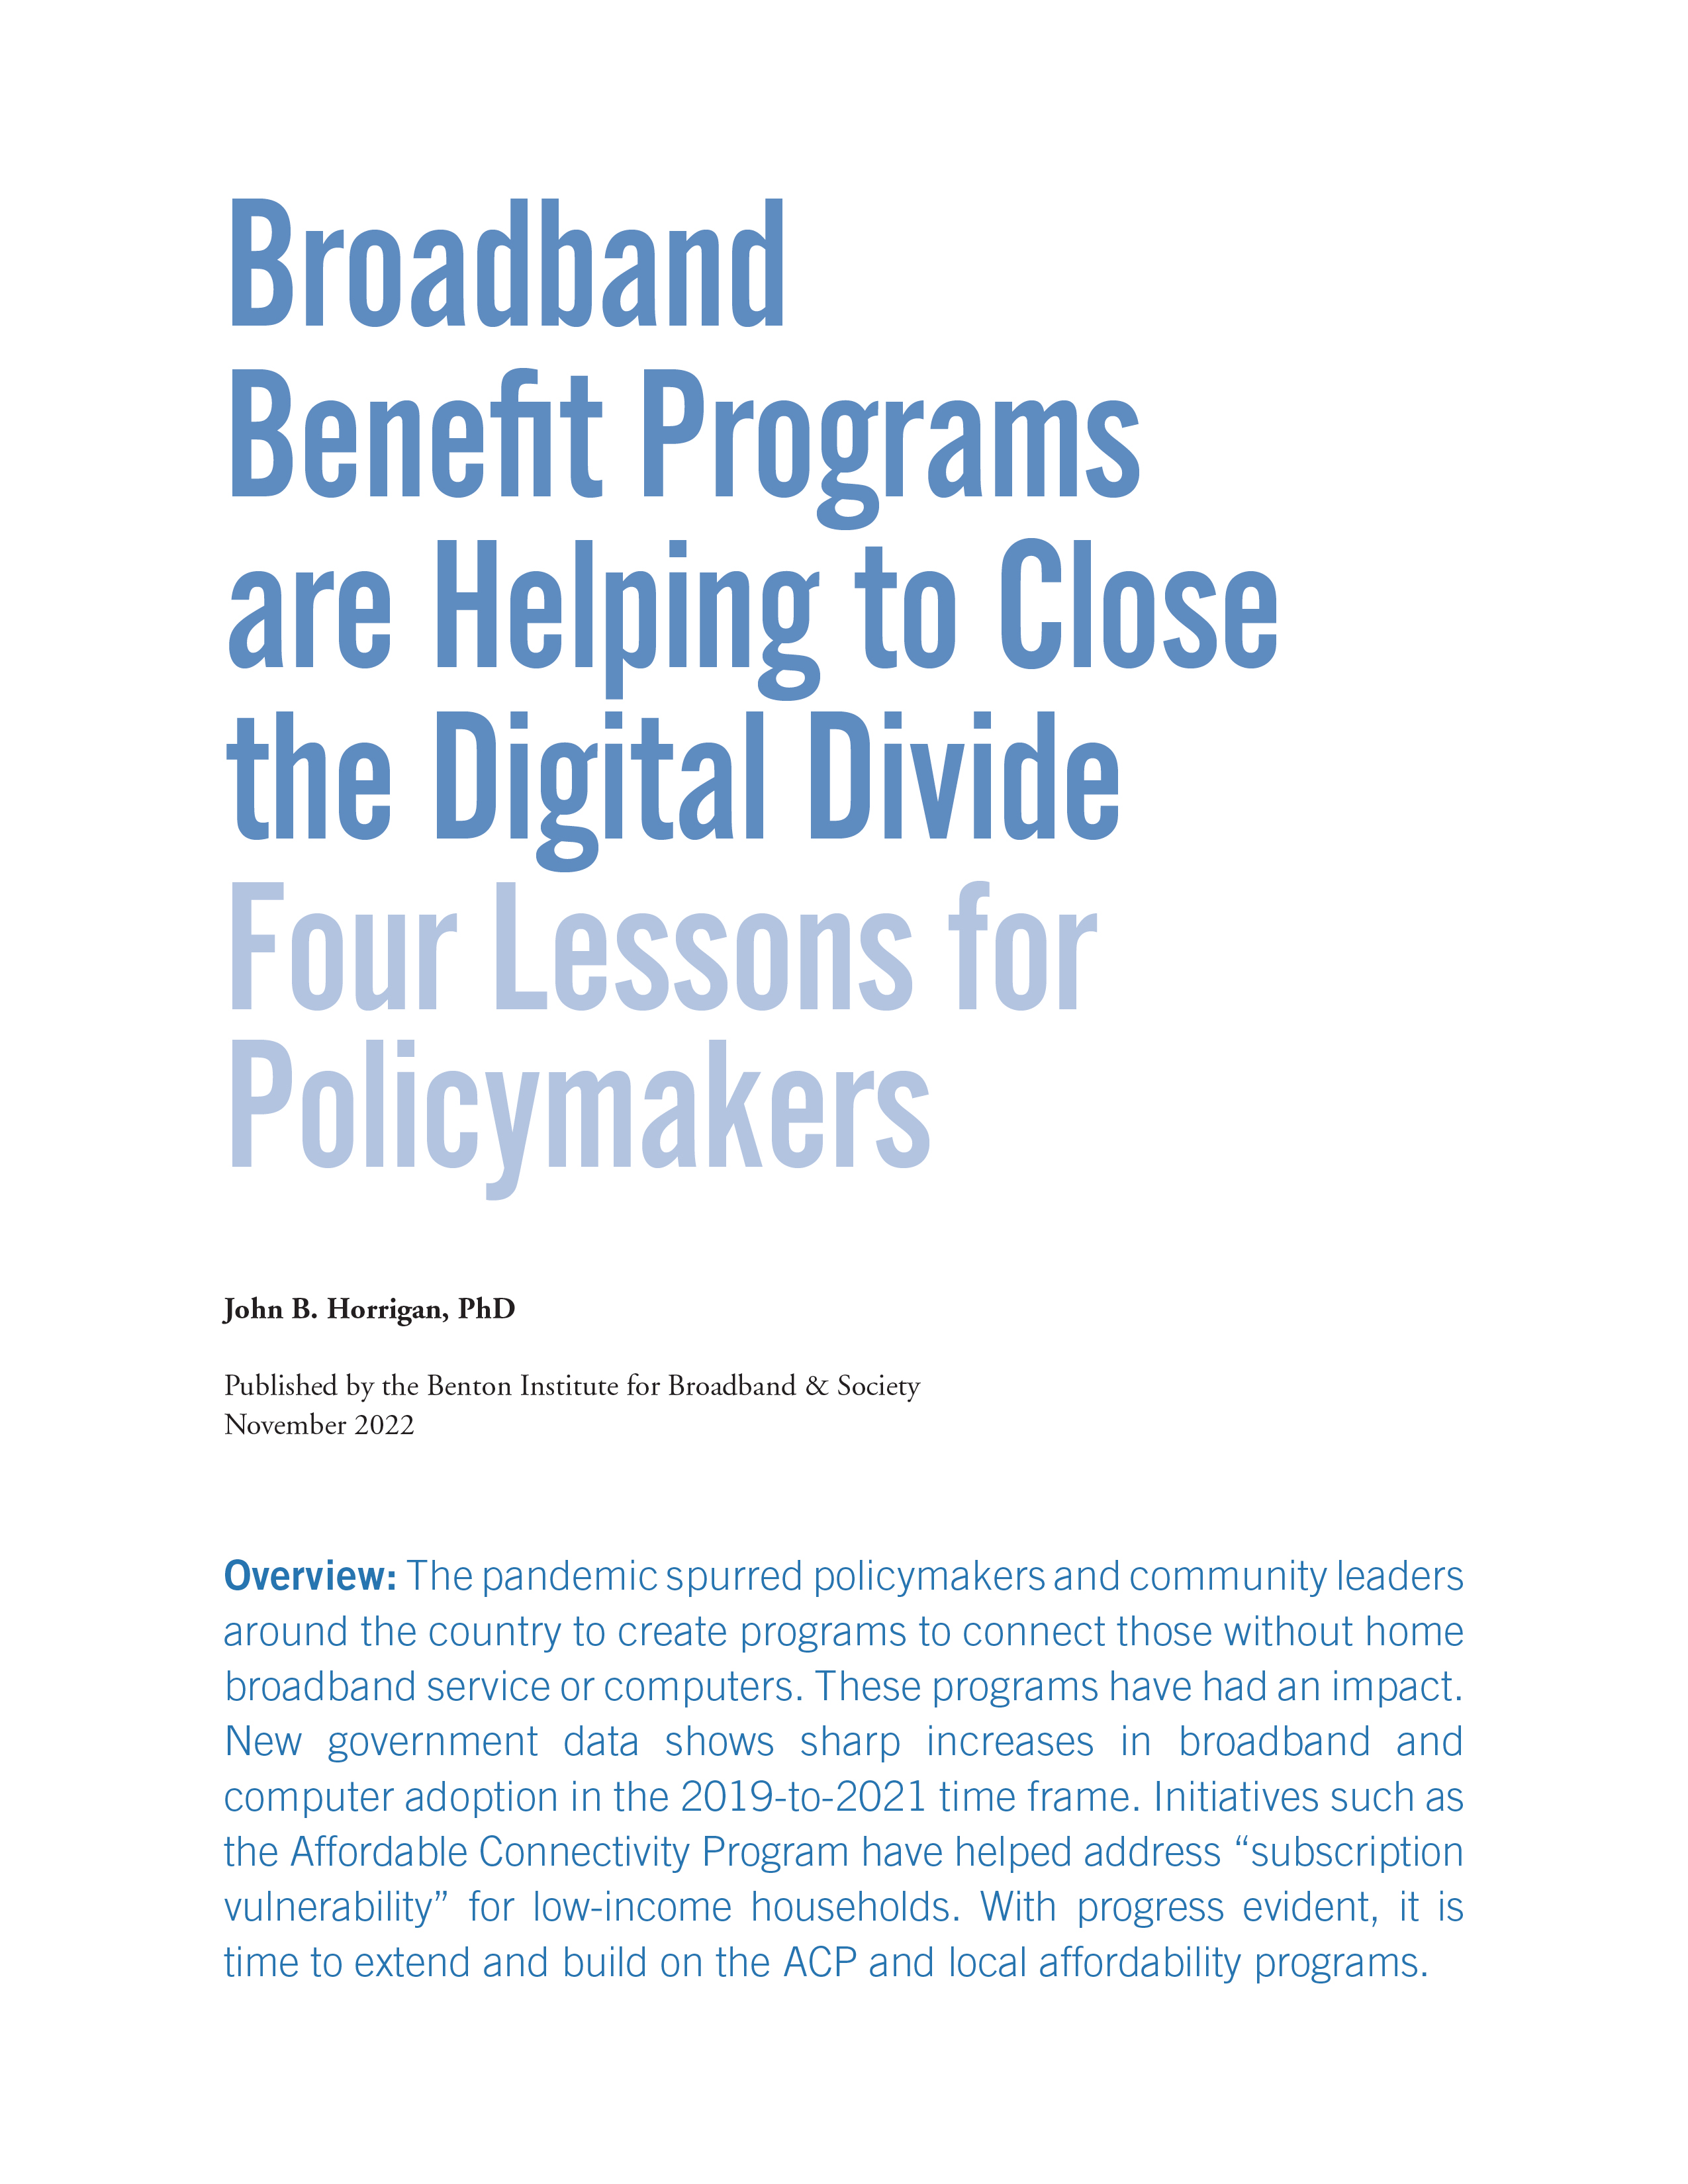 Broadband Benefit Programs are Helping to Close the Digital Divide